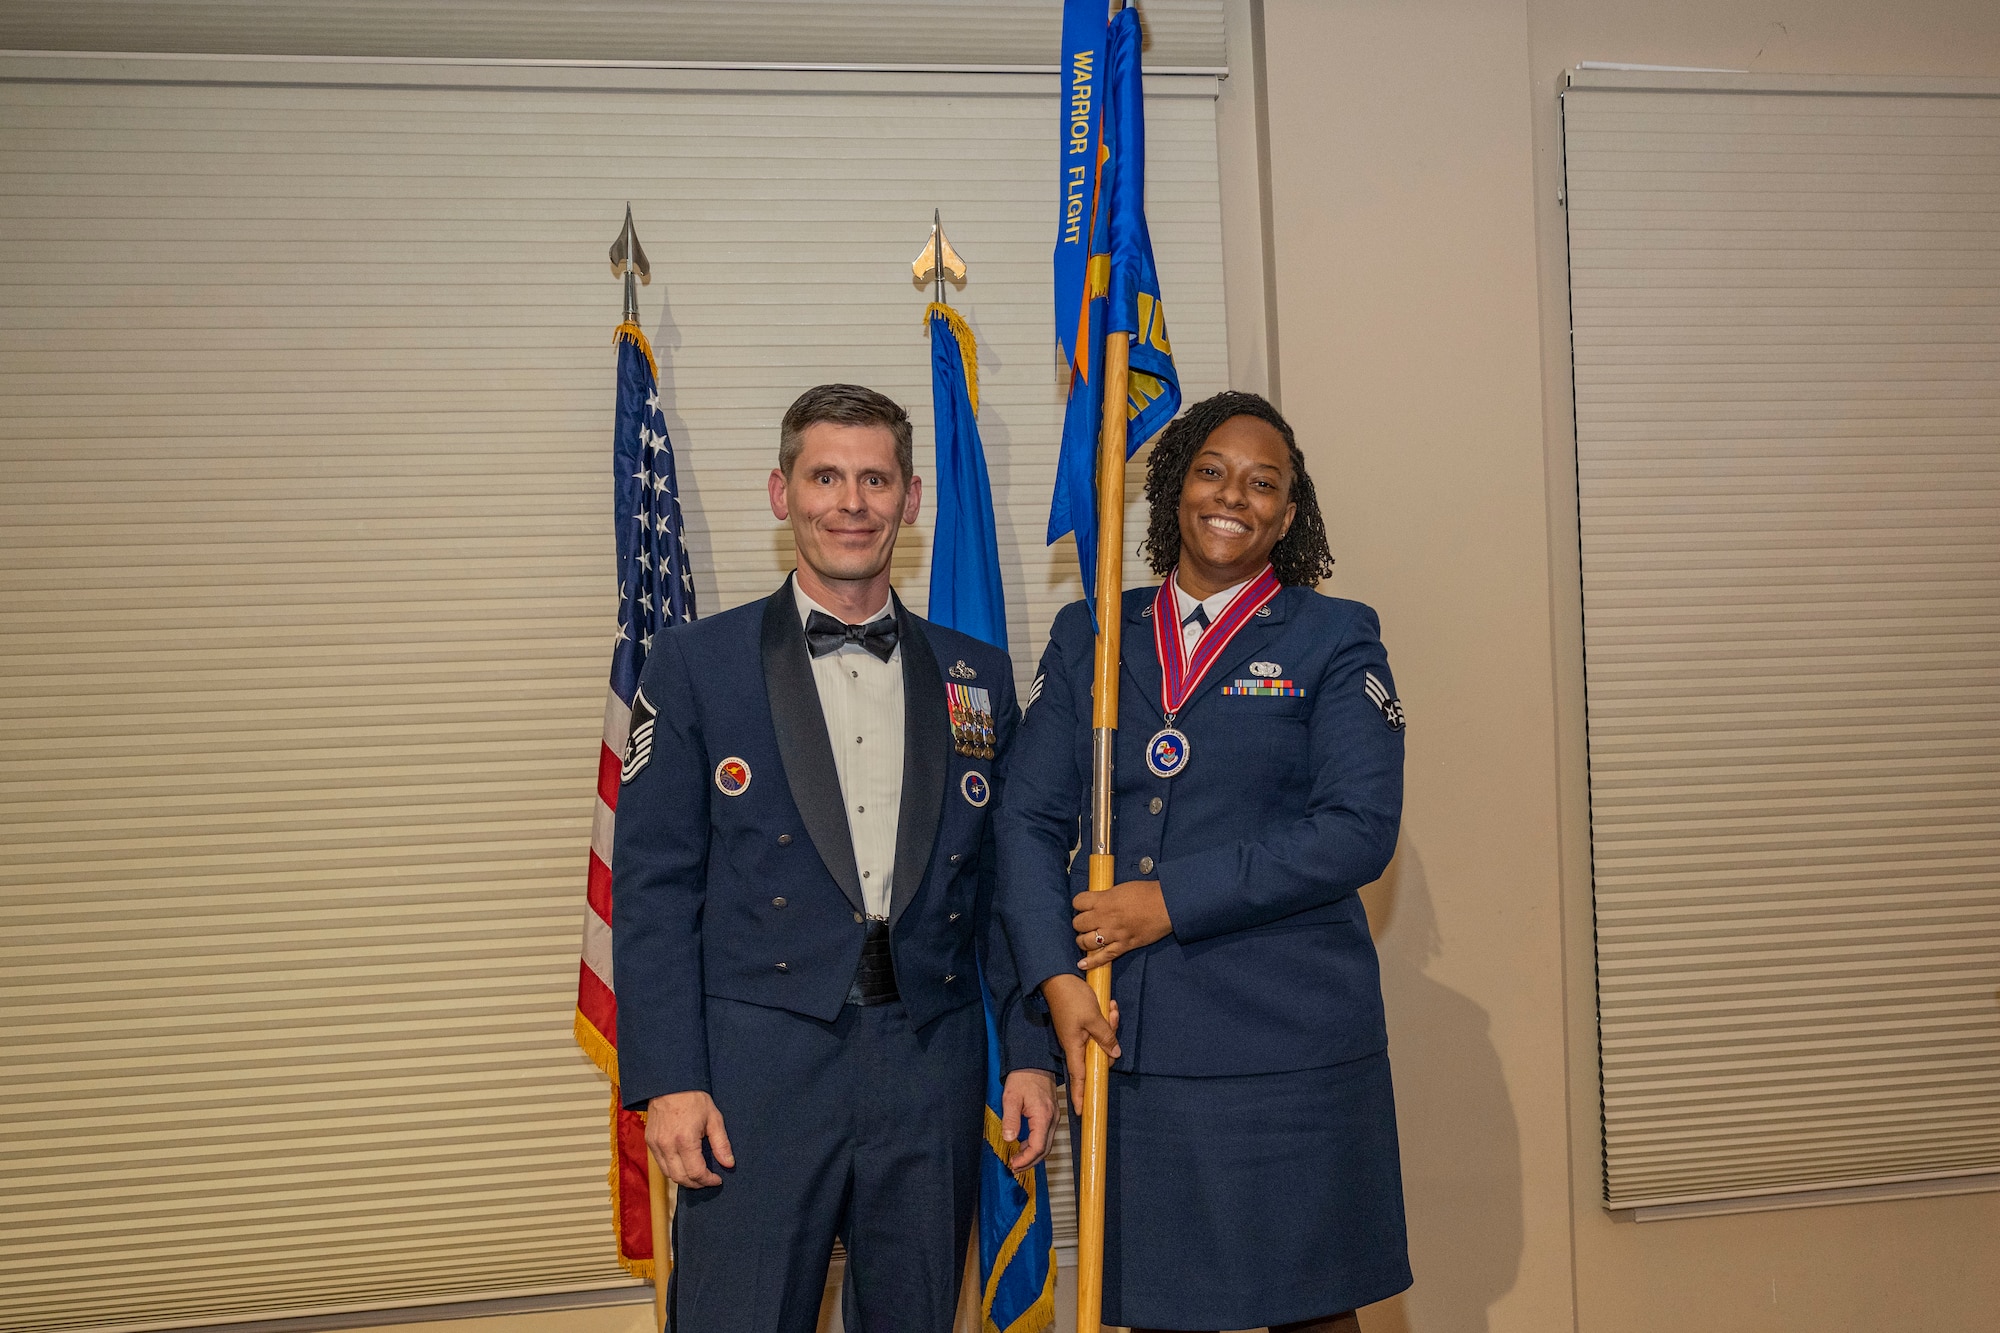 Senior Airman Shartavia Oaks, 4th Security Forces Squadron investigator, right, poses for a photo with Master Sergeant Brandin Wendt, Airman Leadership School commandant, after receiving the warrior flight award during ALS class 23-B graduation ceremony at Seymour Johnson Air Force Base, North Carolina, Feb. 9, 2023. The warrior flight award is given to the flight who scores best in the categories of dress and appearance, Air Force physical fitness tests, quiz bowl academics, commandant cup performance and individual recognitions by first sergeants and instructors.